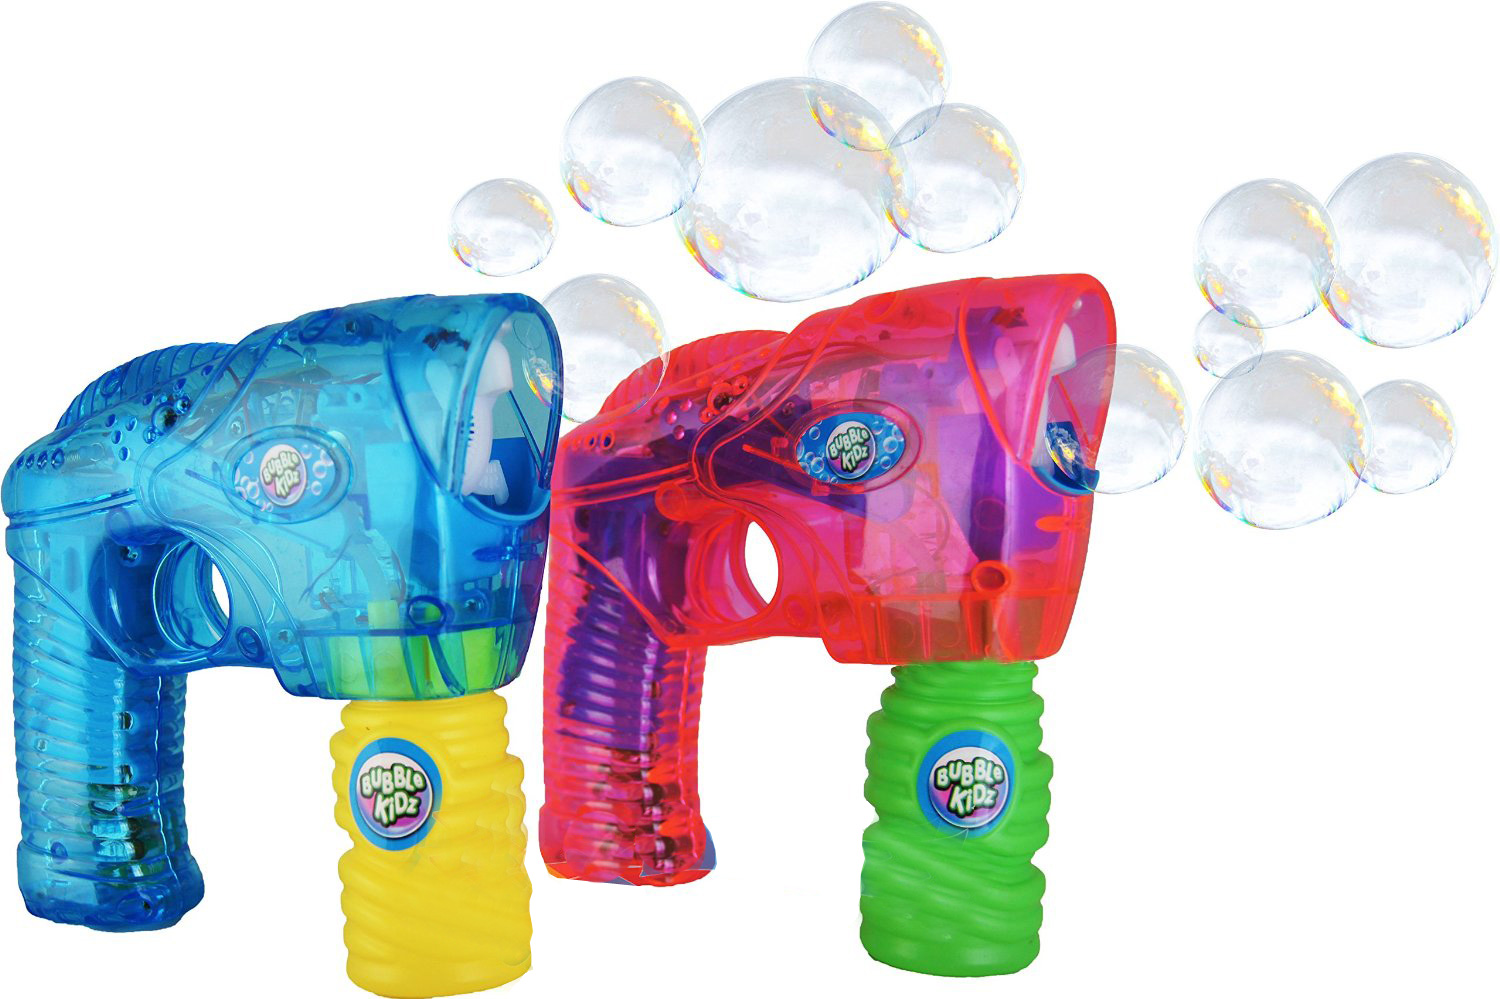 Incredible Uses and Advantages of Bubble Guns